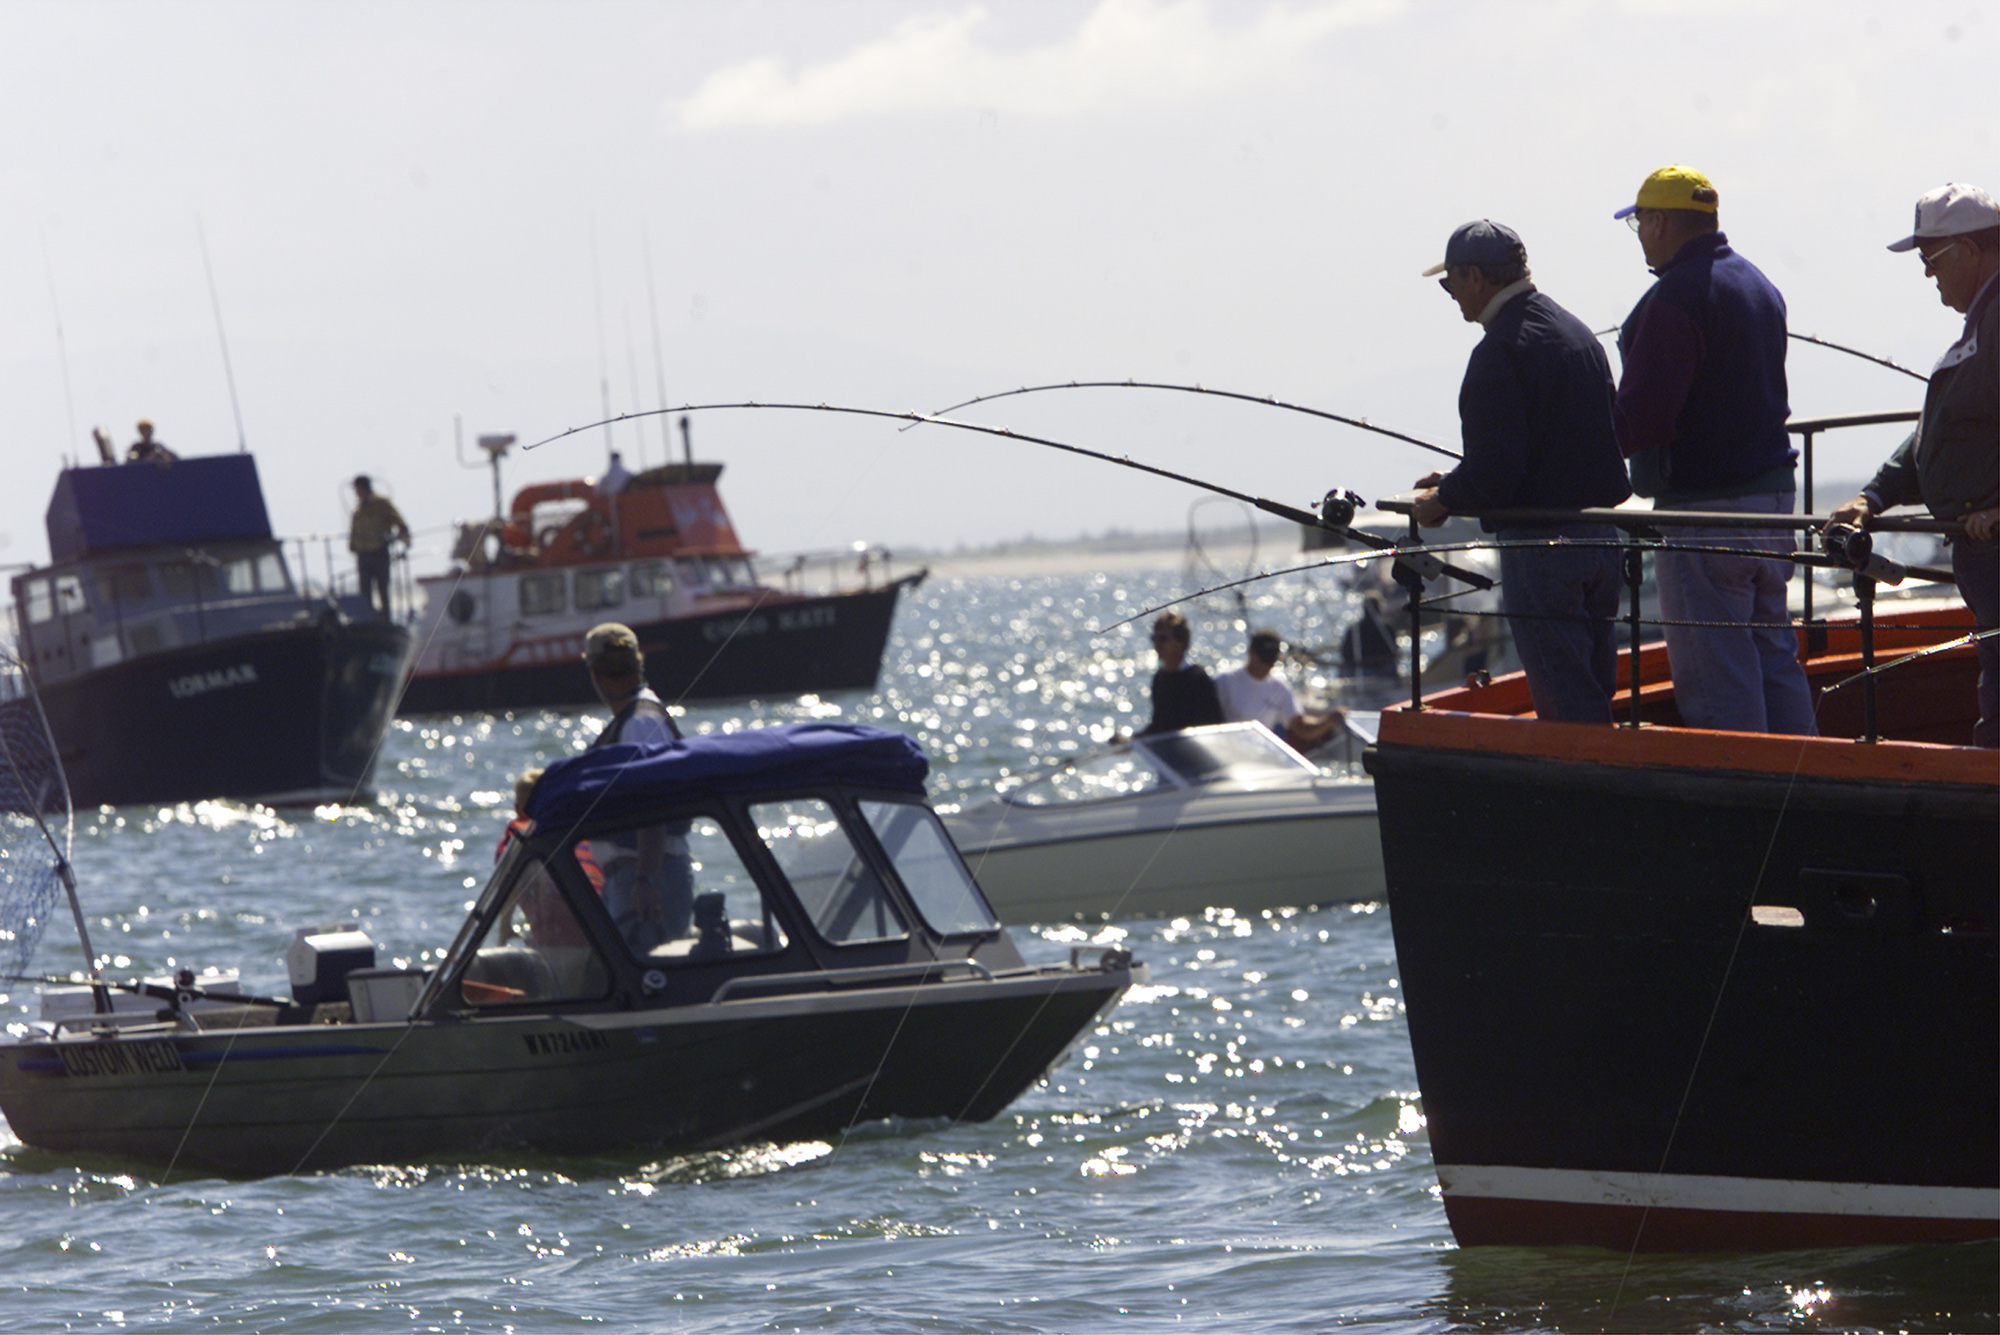 Anglers in the popular Buoy 10 fishery at the mouth of the Columbia River will be limited to keeping only hatchery chinook and hatchery coho salmon during the 2023 summer season.